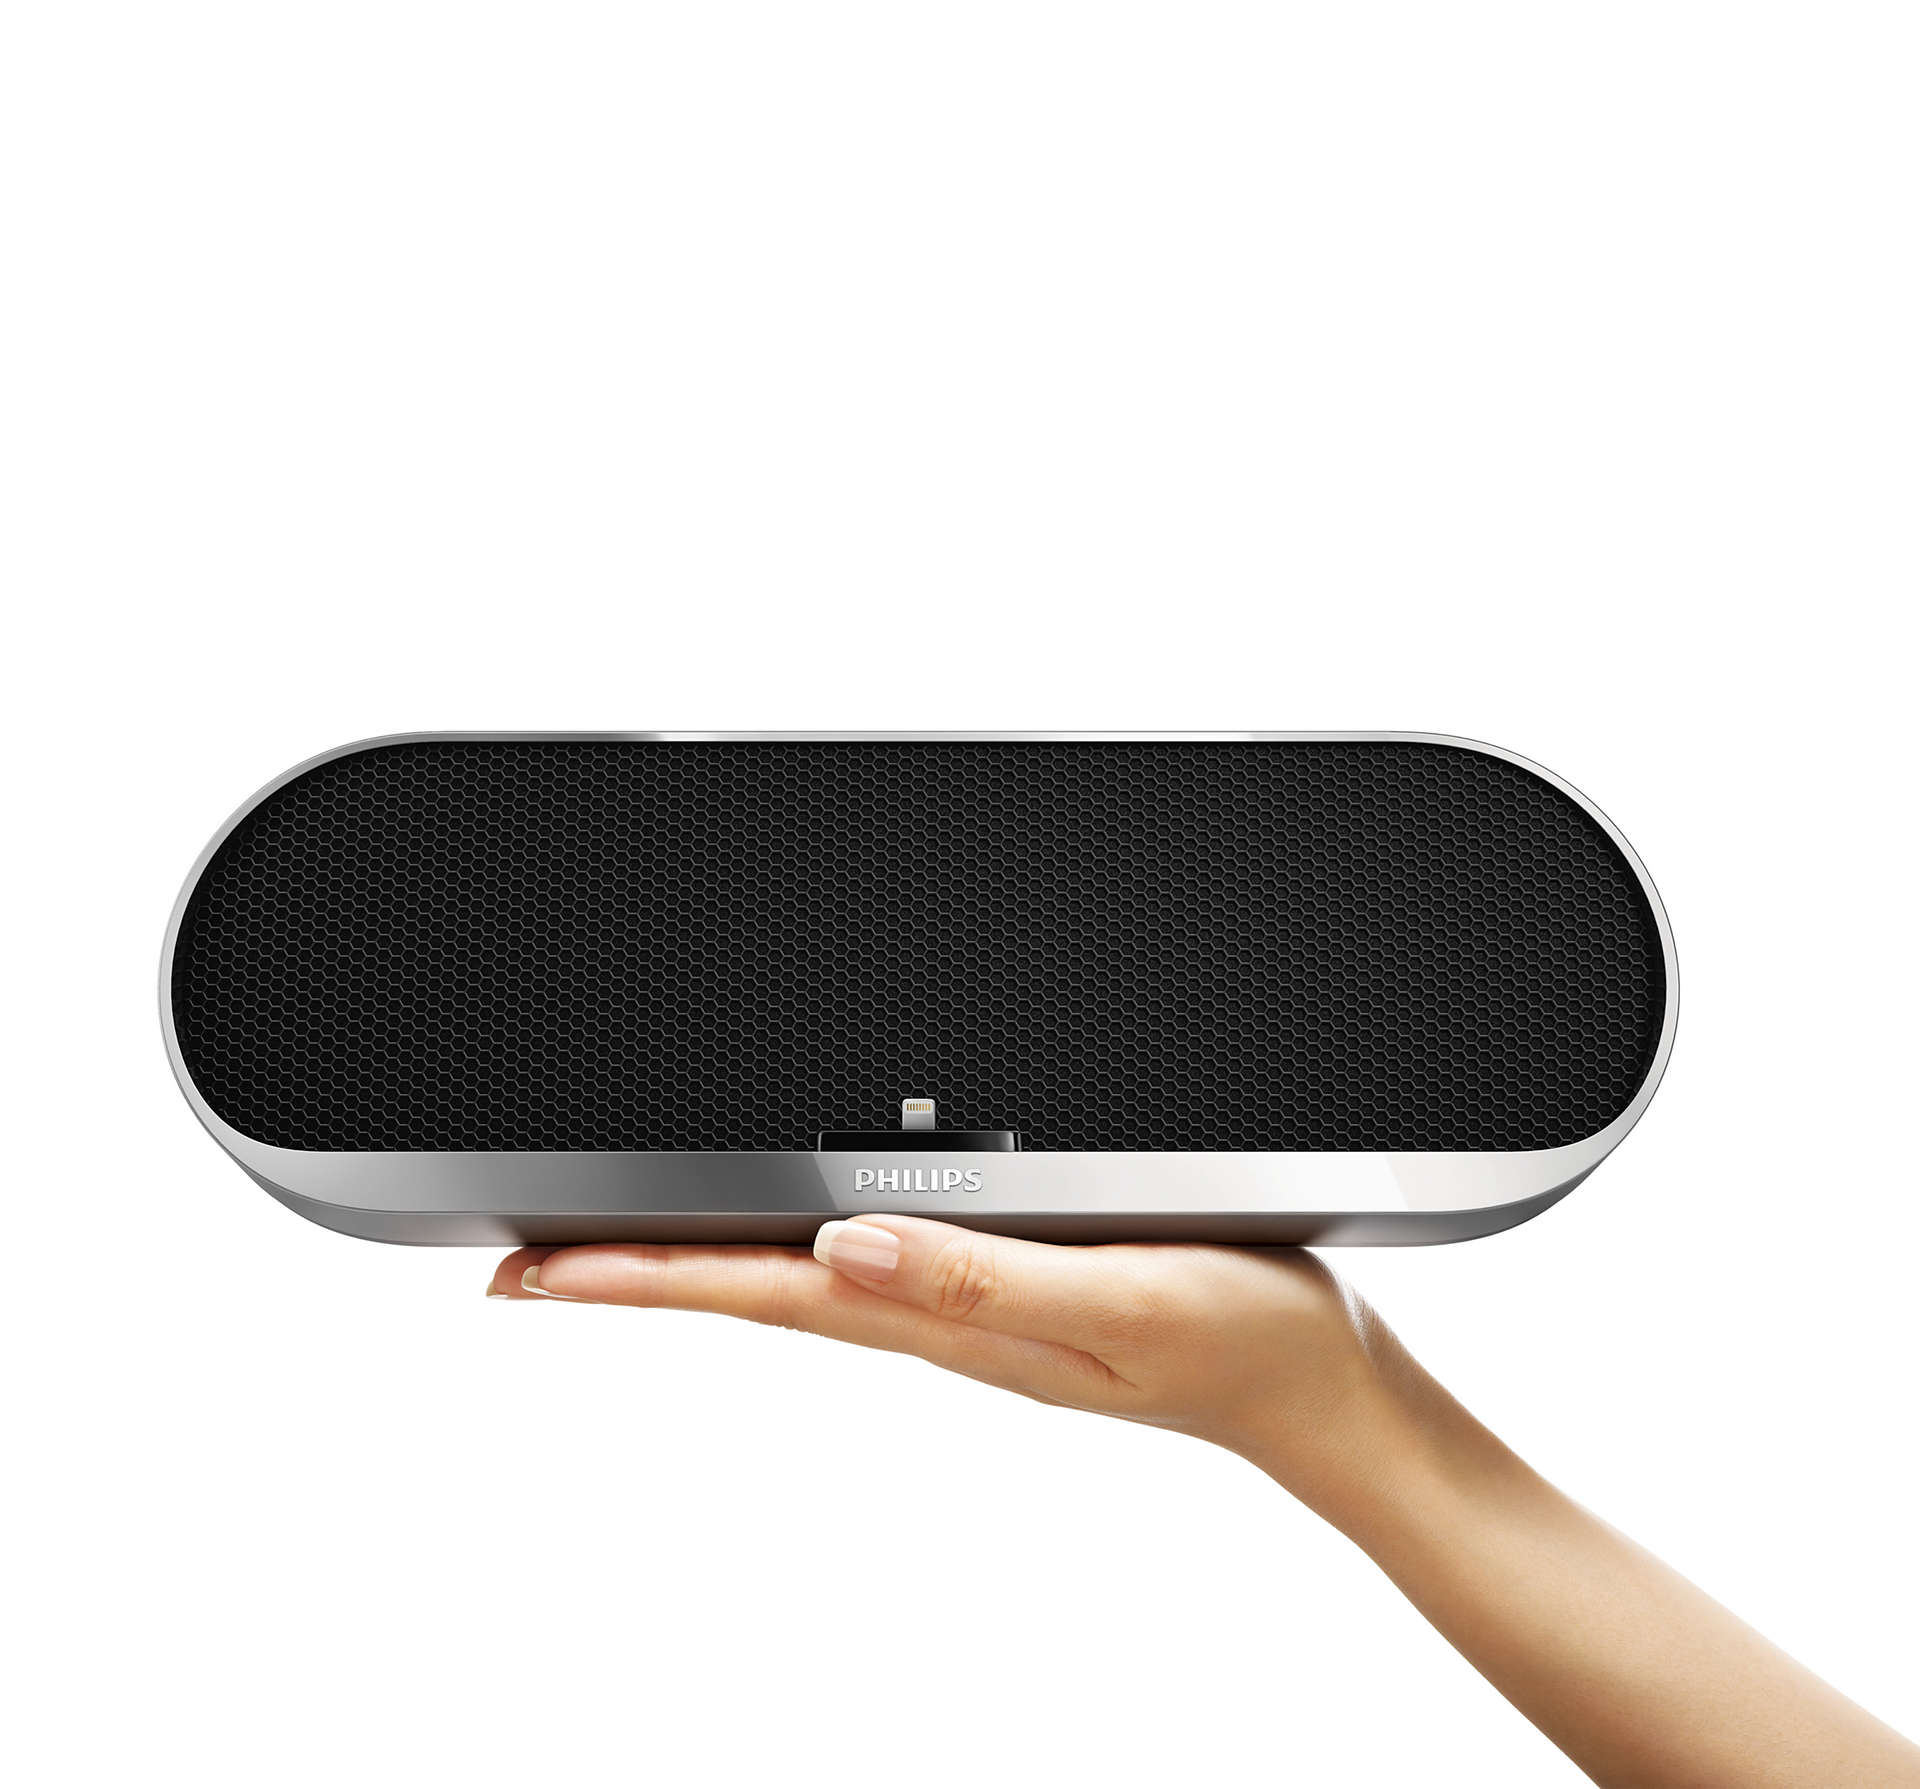 FREE -Philips docking speaker with Bluetooth